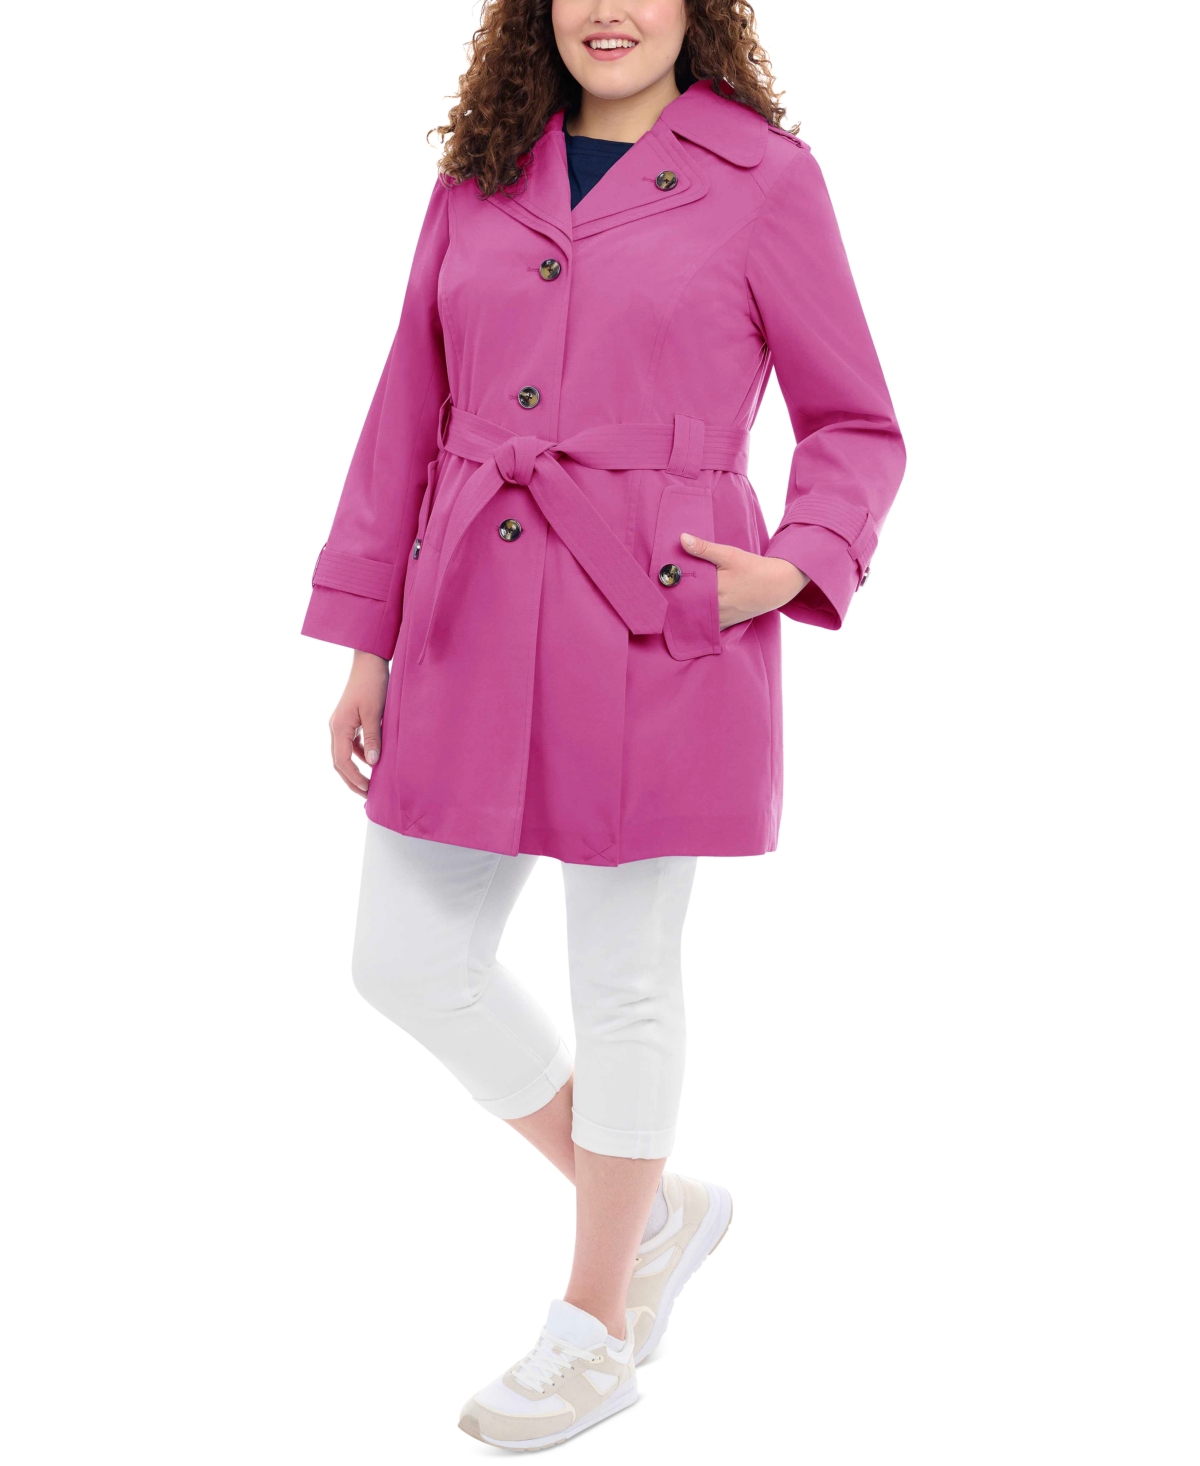 London Fog Women's Plus Size Hooded Belted Water-resistant Coat In Orchid